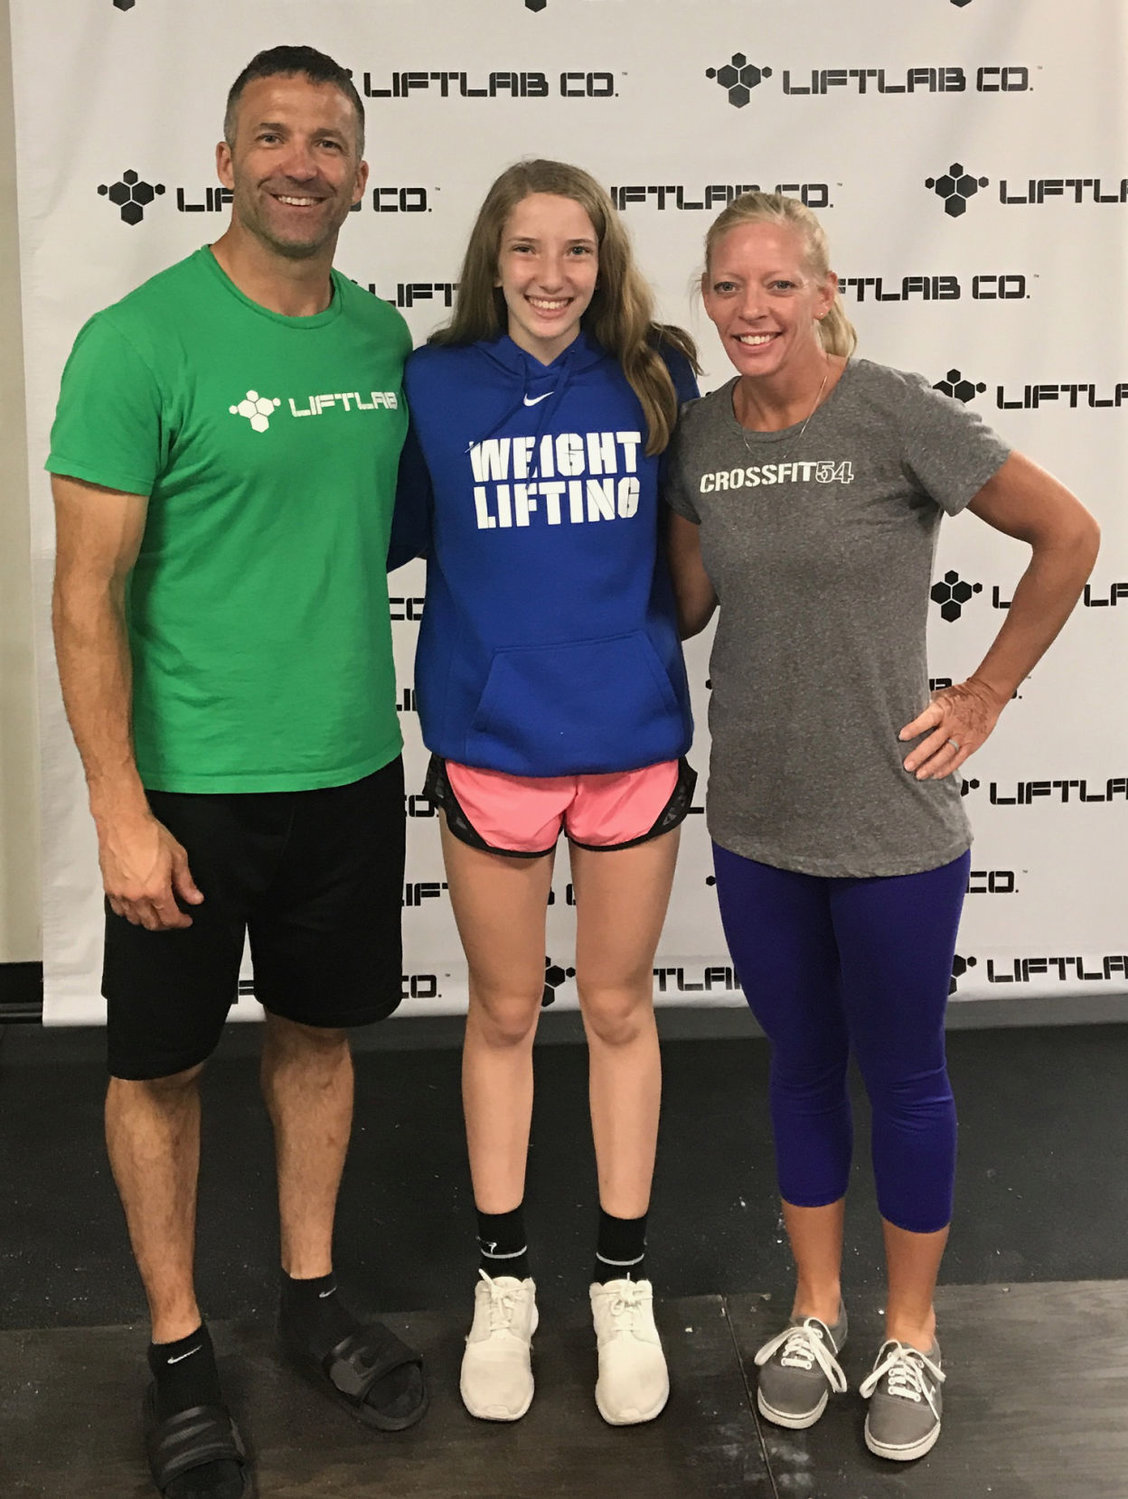 Dori, 13, center, poses with her parents, Jake and Samantha Fredrick at the Lift Lab, Indianapolis.